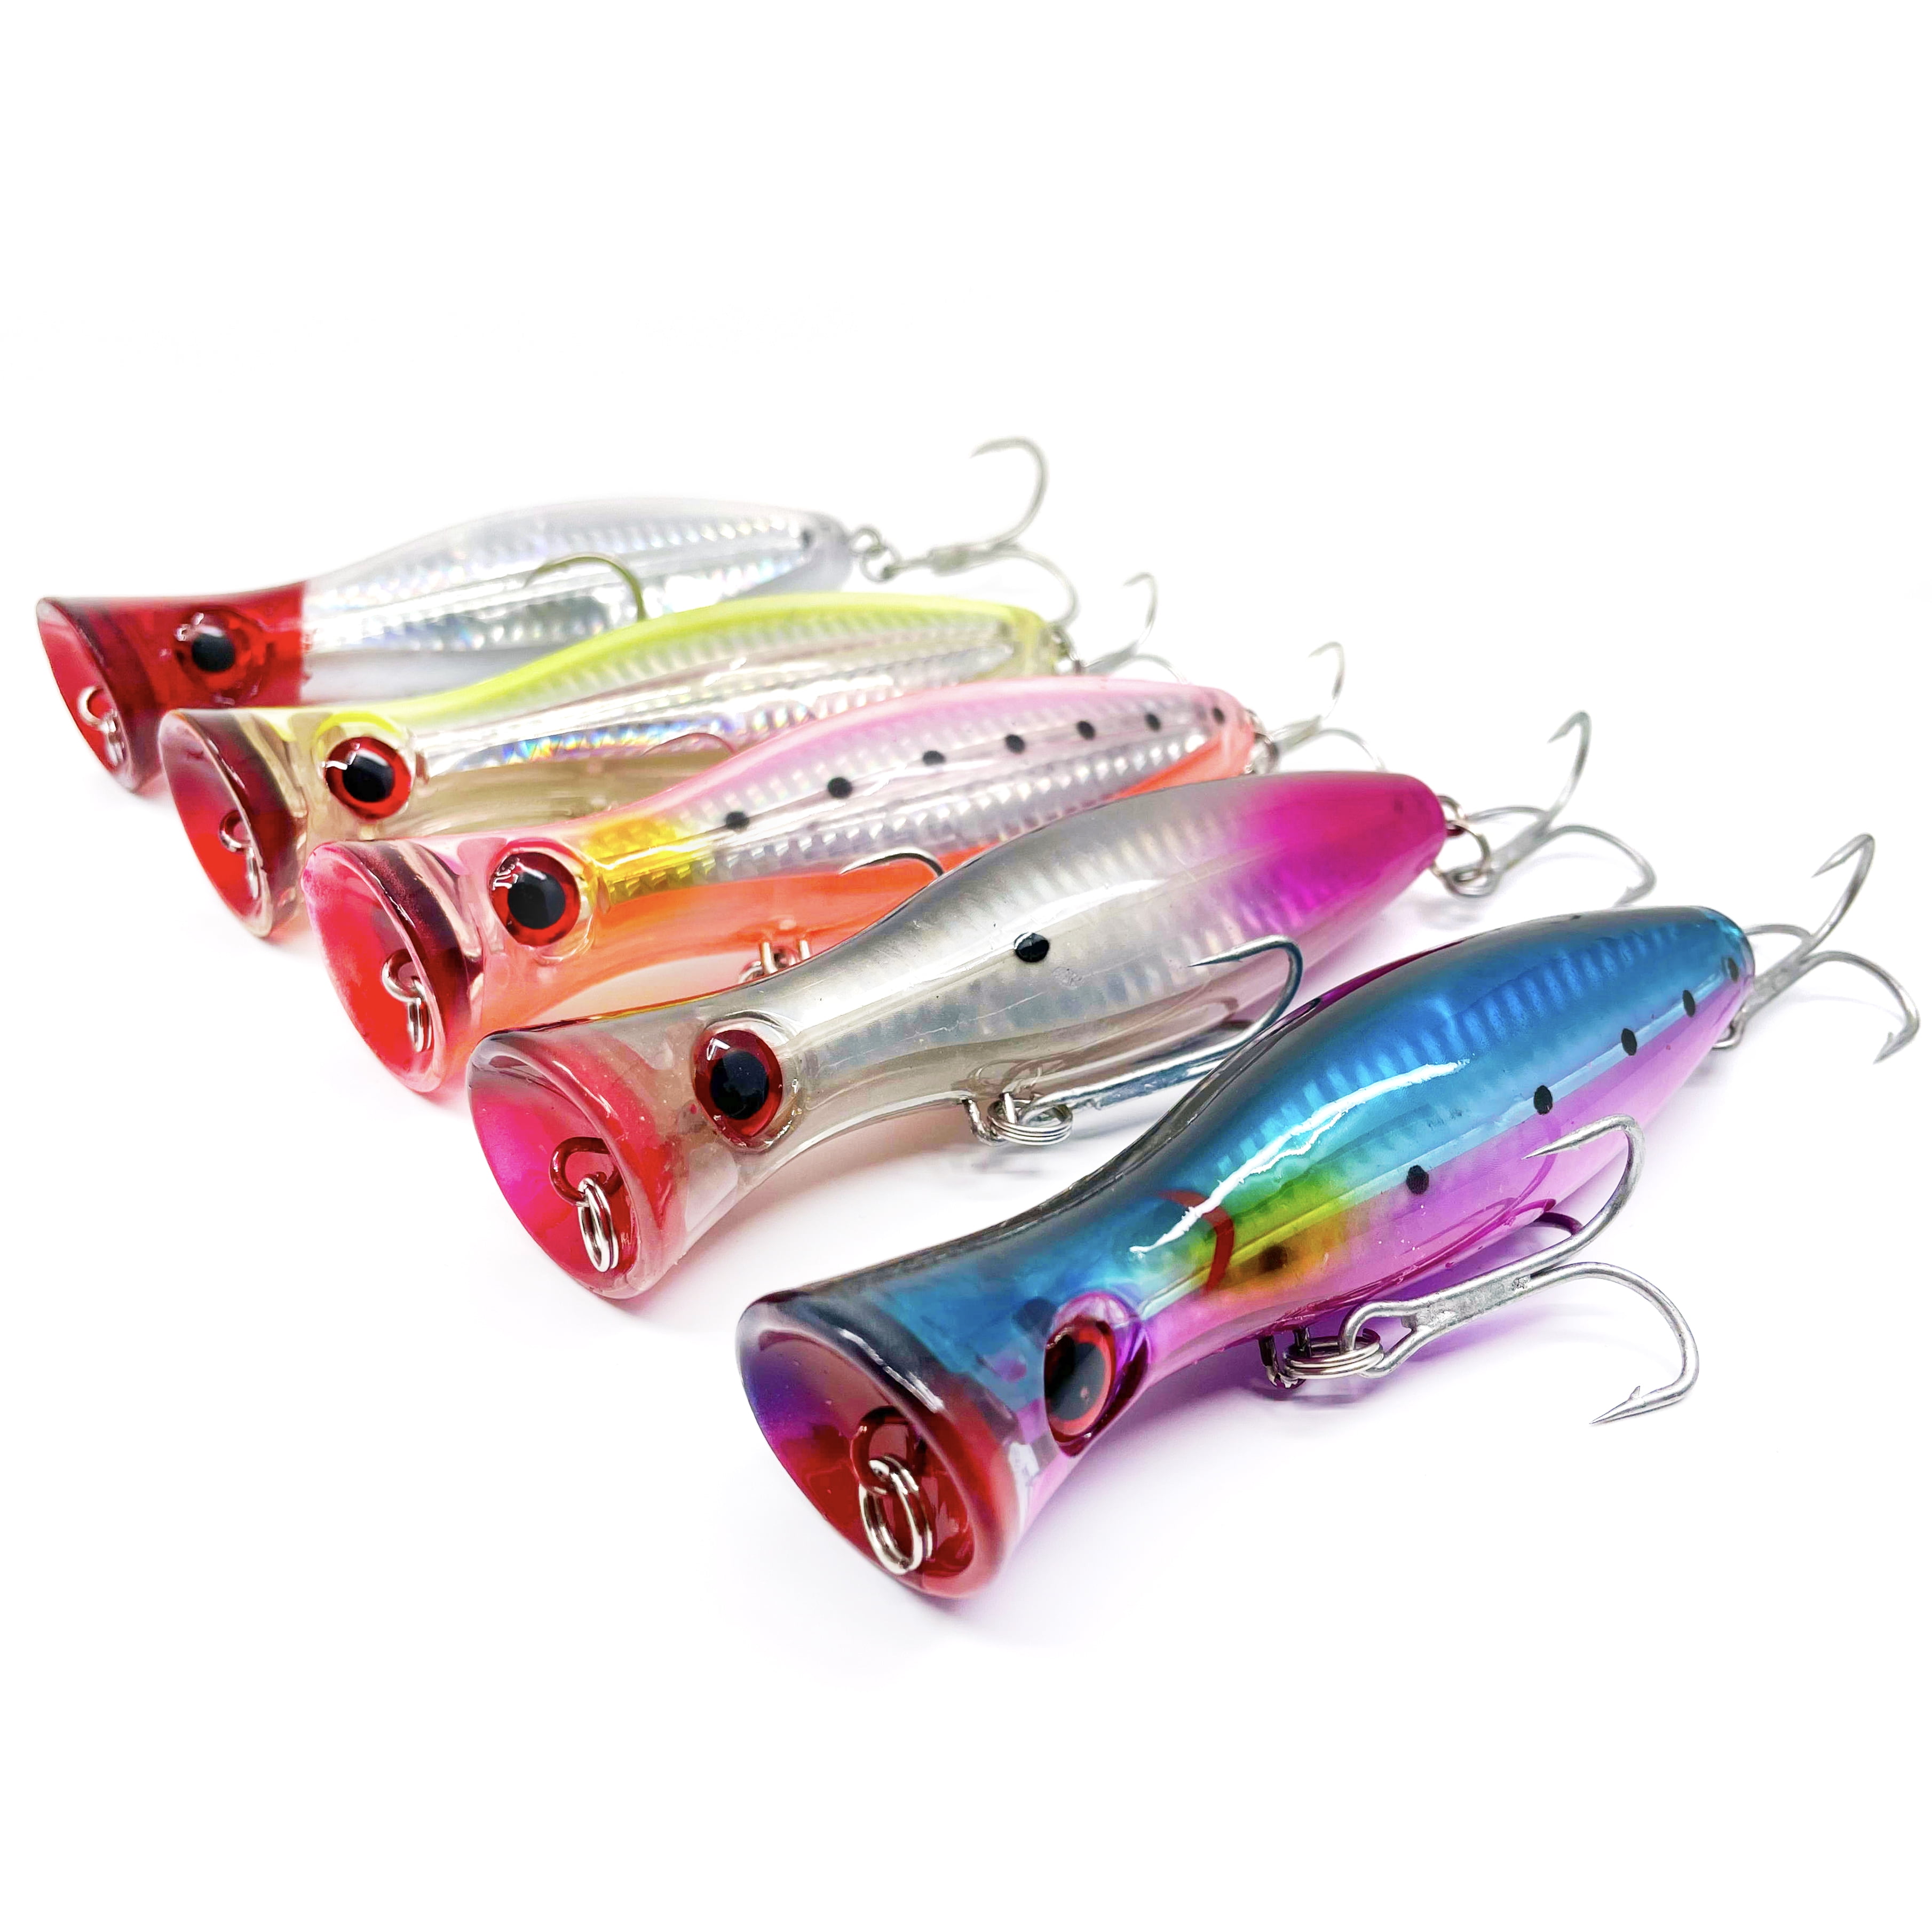 4 pcs mini Topwater Popper sets w/ tails- 1.6 inches – Super Lures USA